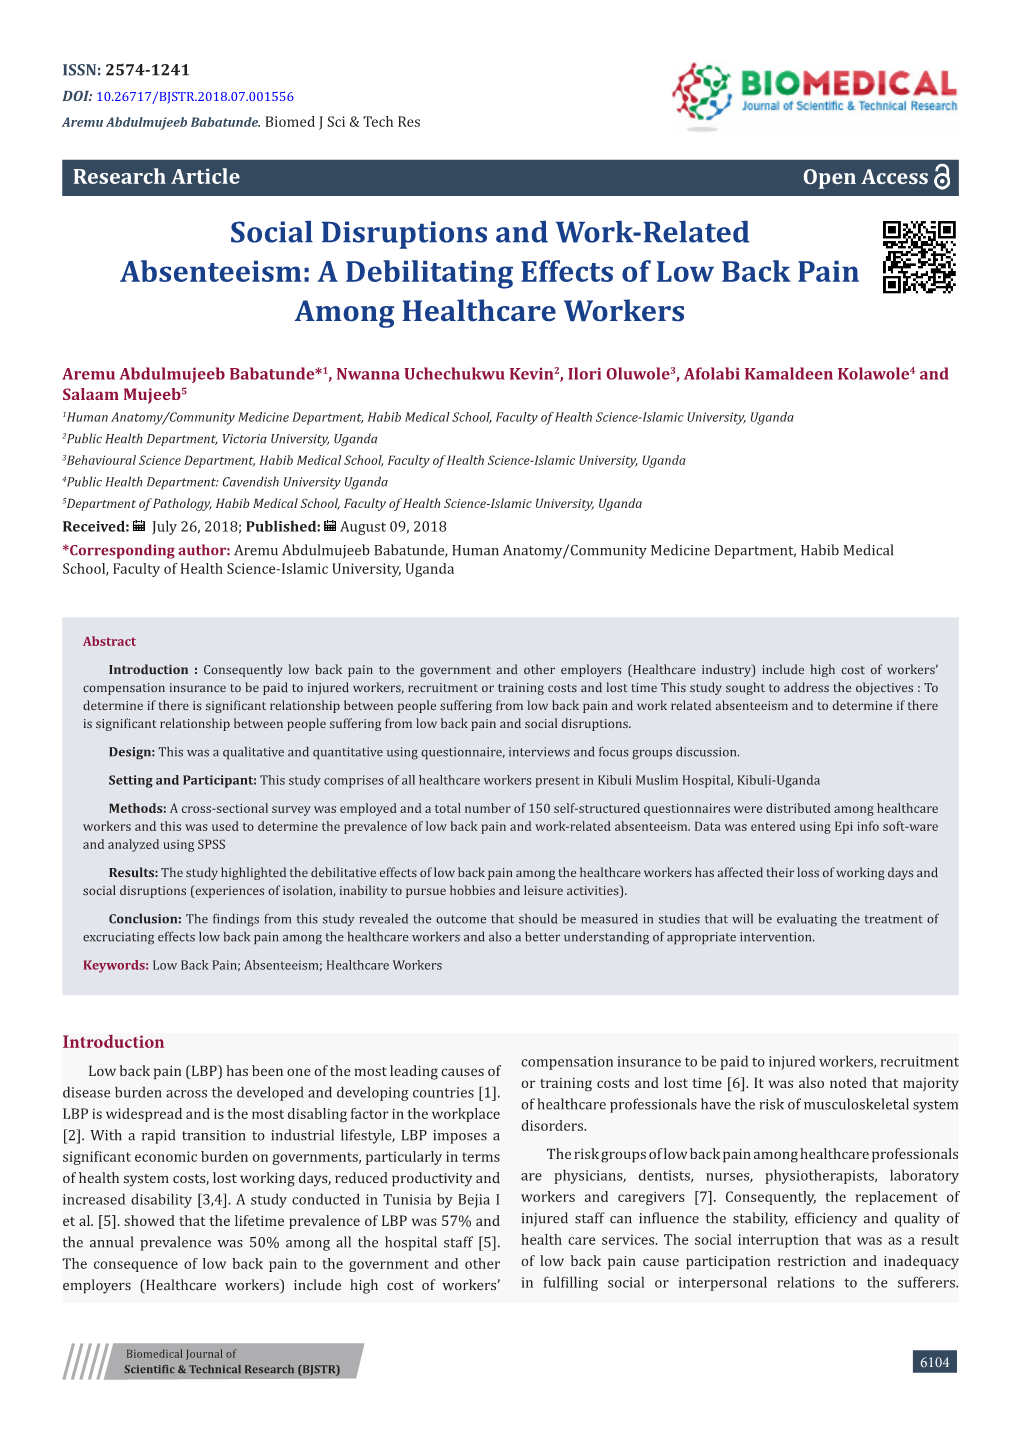 A Debilitating Effects of Low Back Pain Among Healthcare Workers